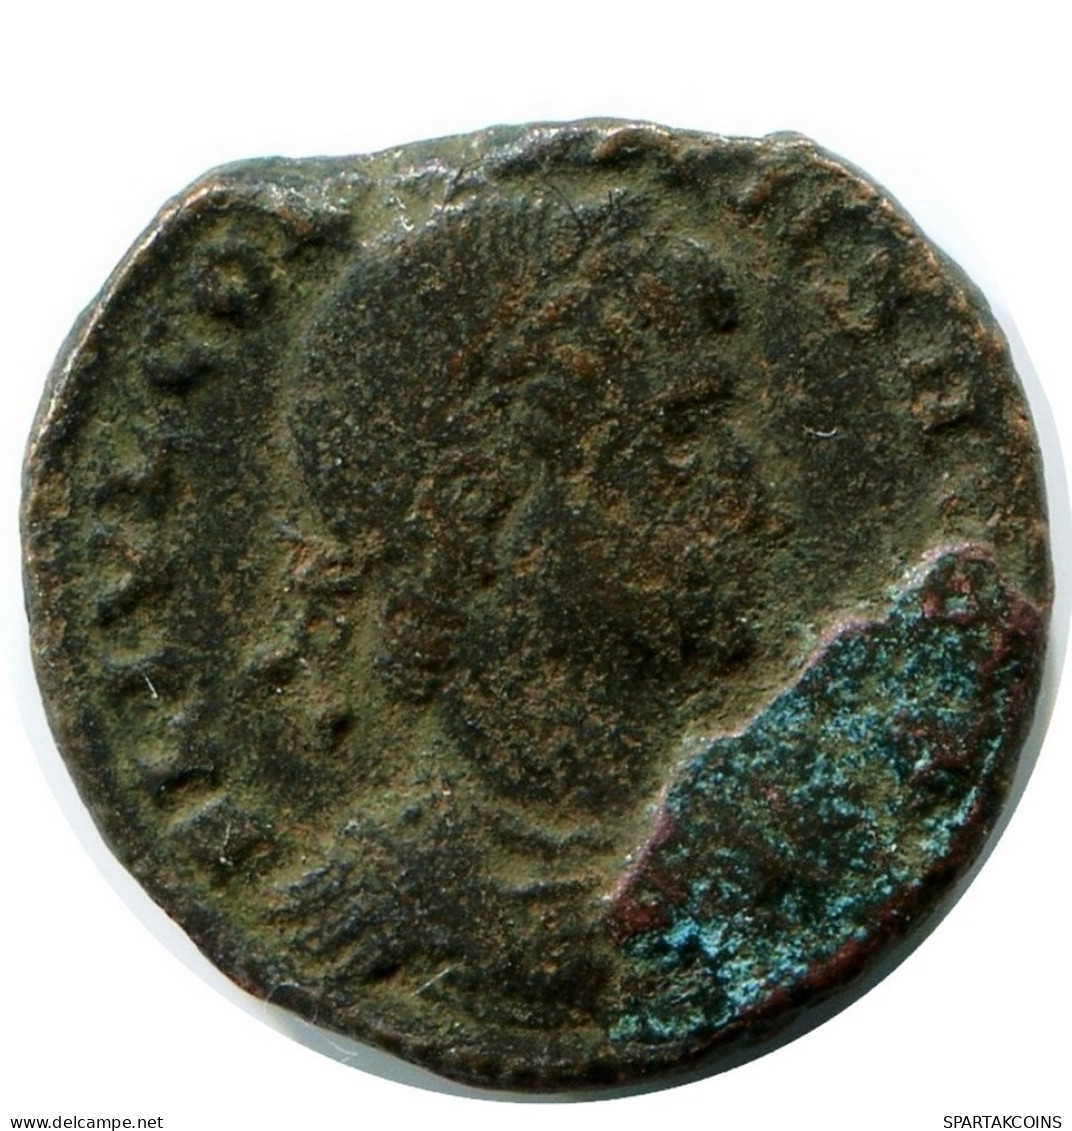 CONSTANS MINTED IN ANTIOCH FOUND IN IHNASYAH HOARD EGYPT #ANC11815.14.D.A - El Imperio Christiano (307 / 363)